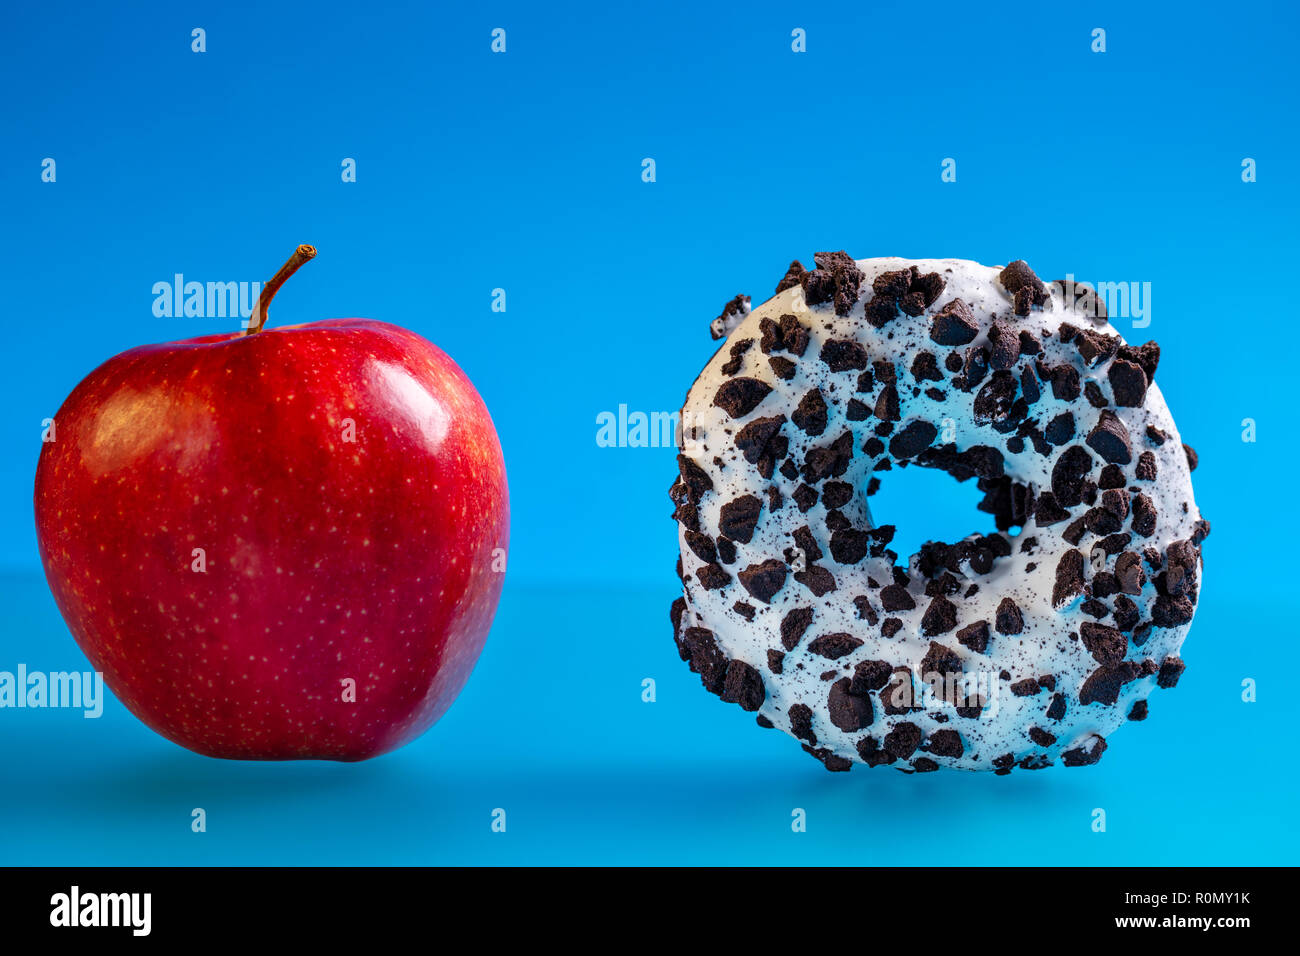 Apple and donut, concept of choice health and unhealthy diet. Stock Photo